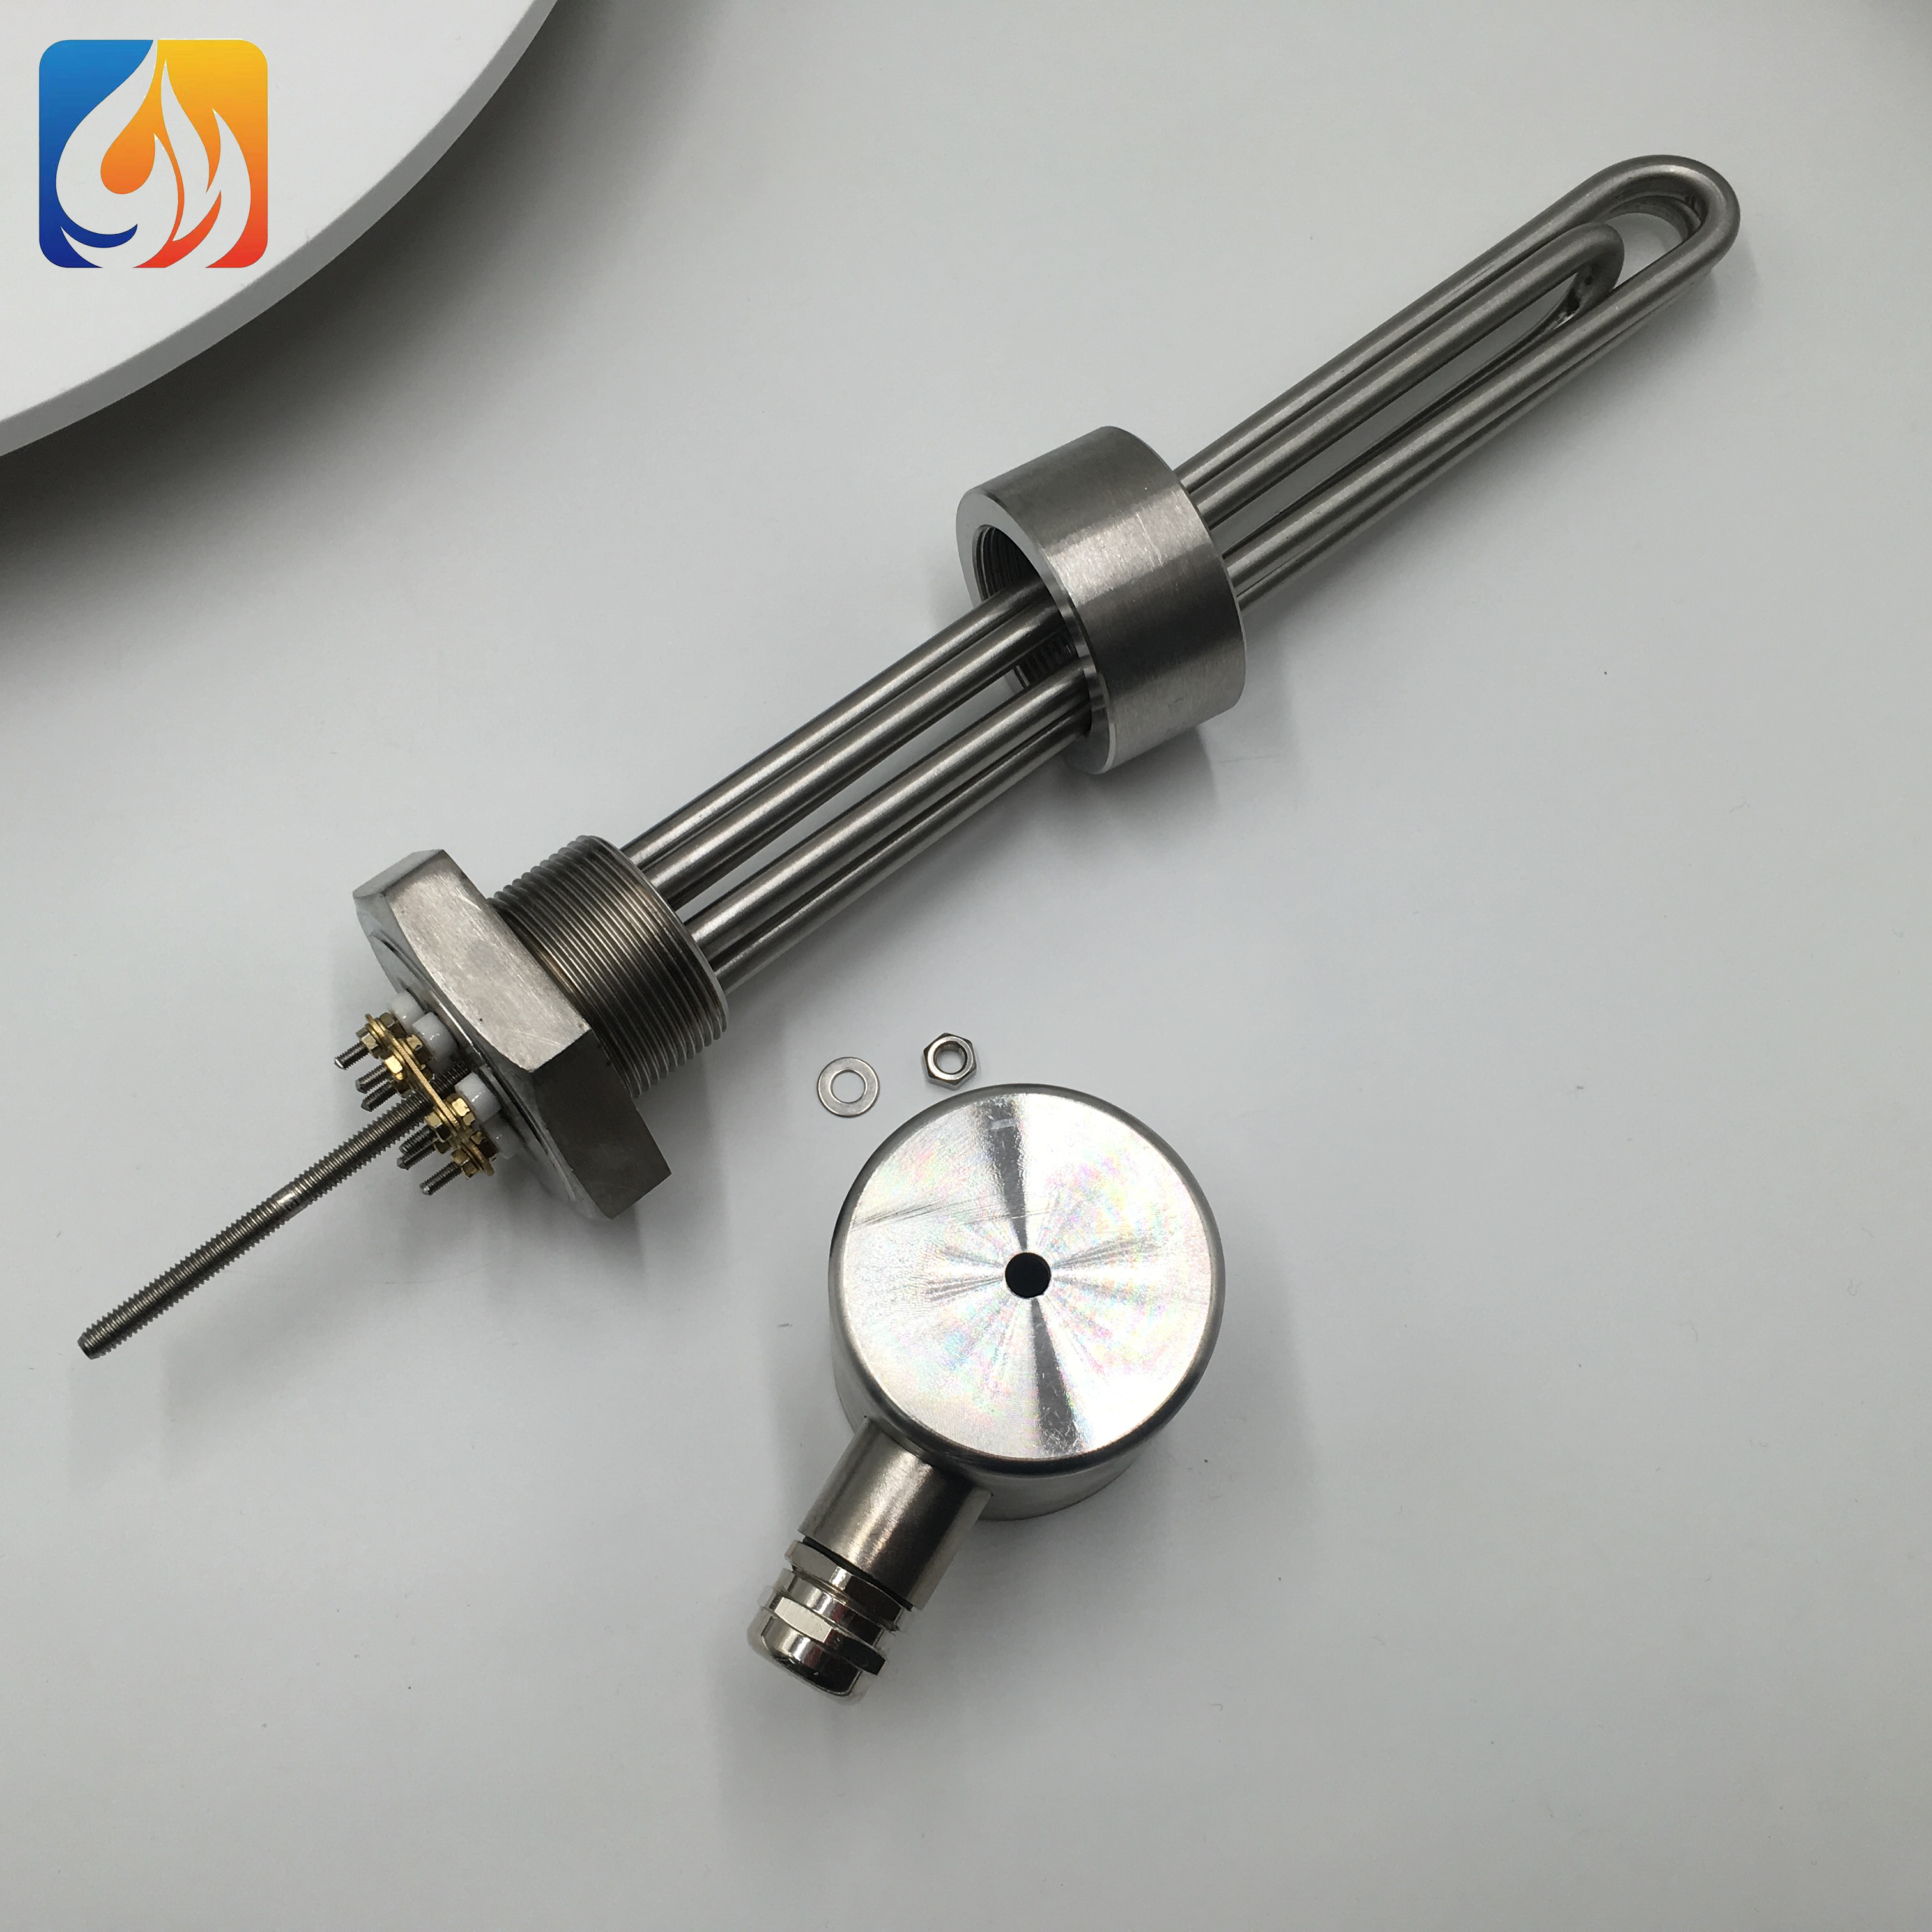 Stainless steel 316 immersion flange heater for industrial liquid heating Featured Image